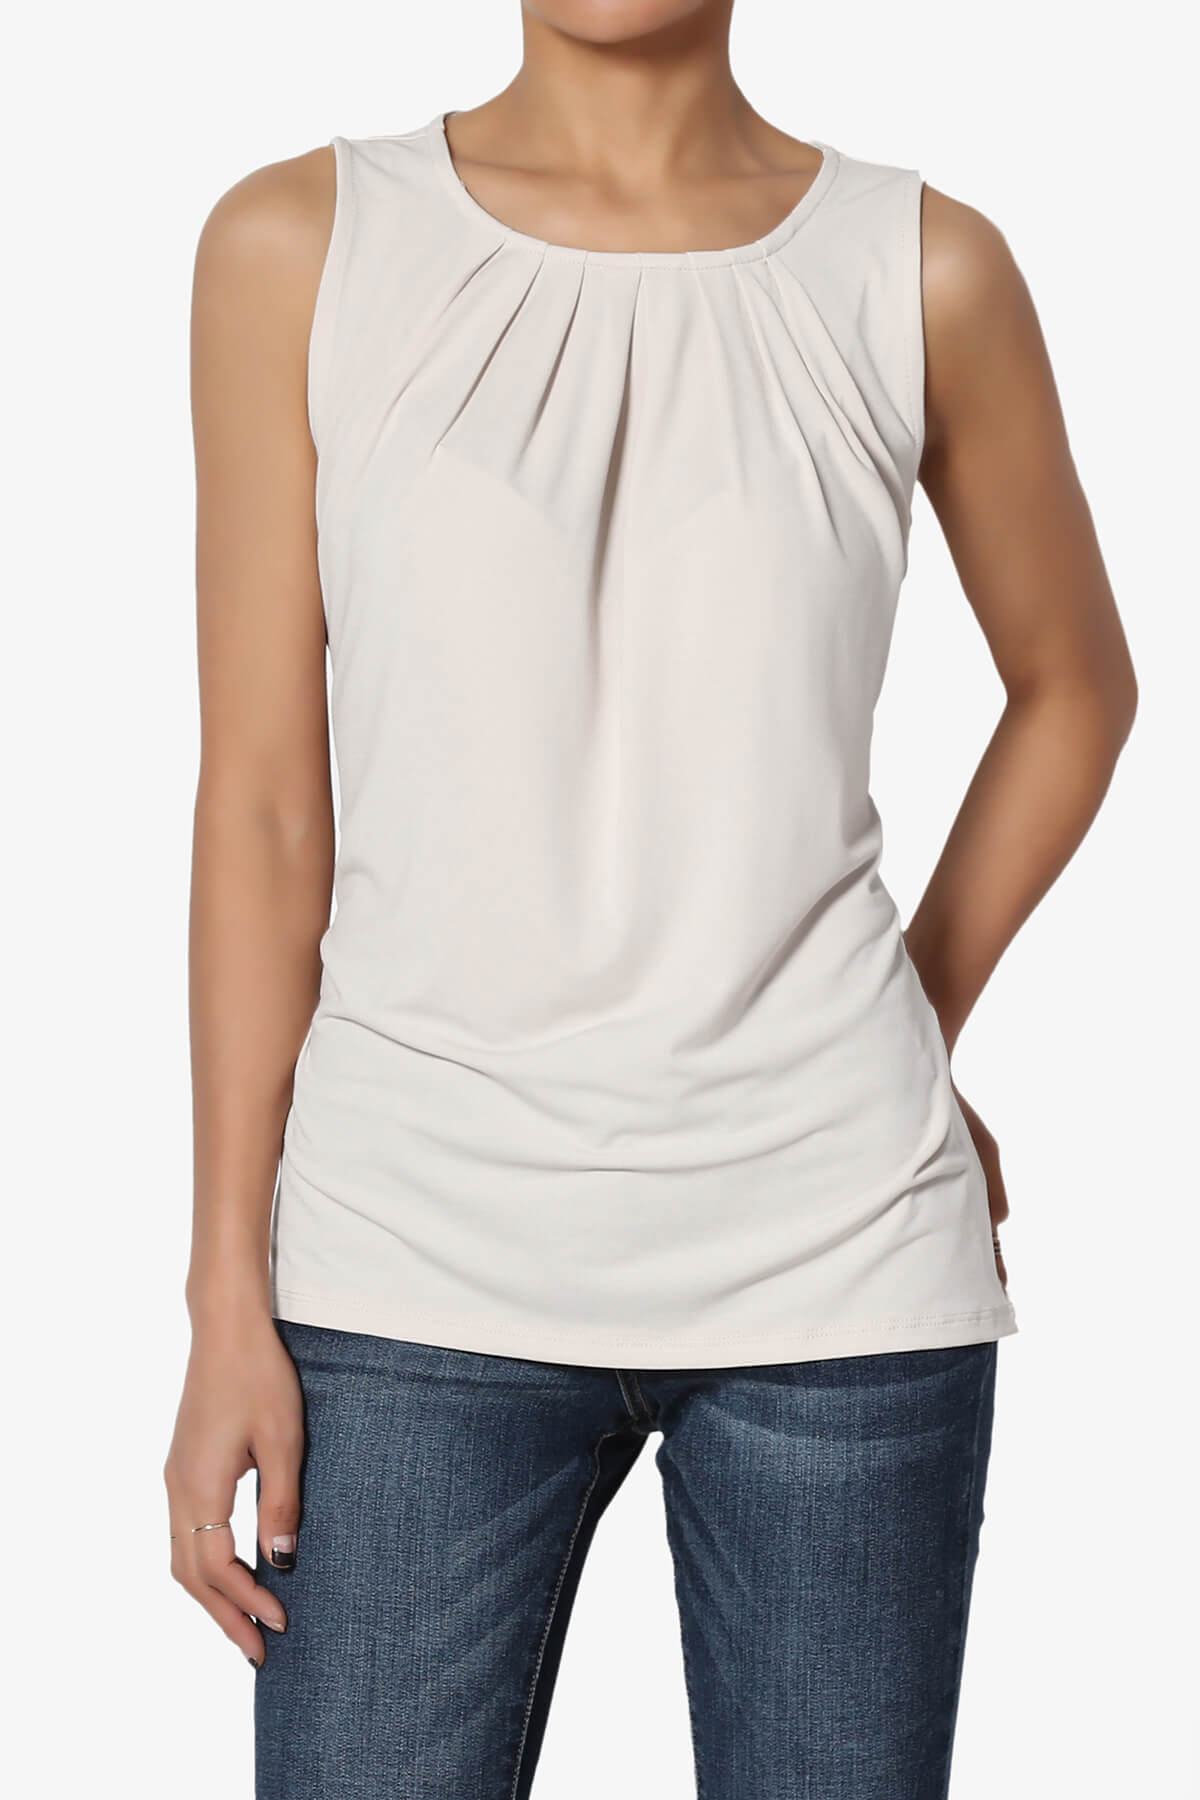 Load image into Gallery viewer, Chaffee Pleat Neck Tank Top BONE_1
